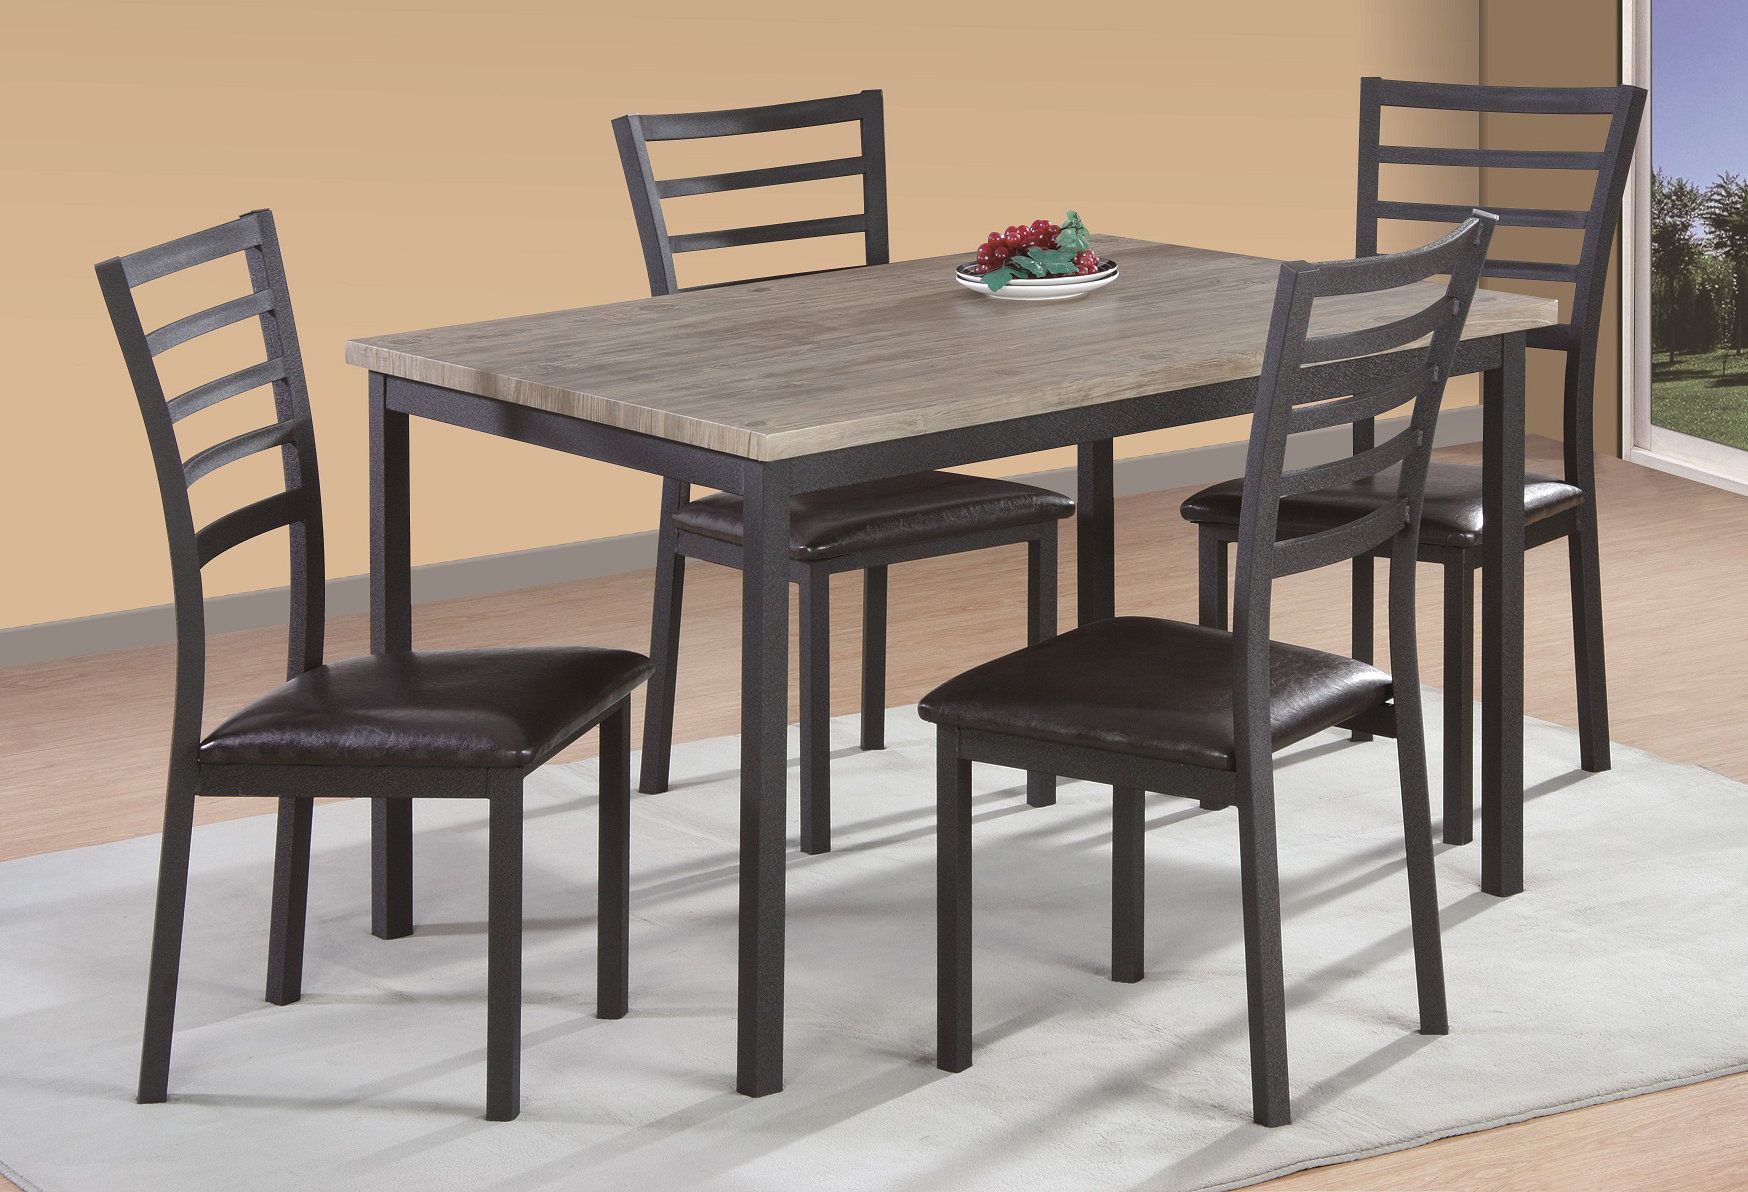 Wayfair Pertaining To Taulbee 5 Piece Dining Sets (View 10 of 20)